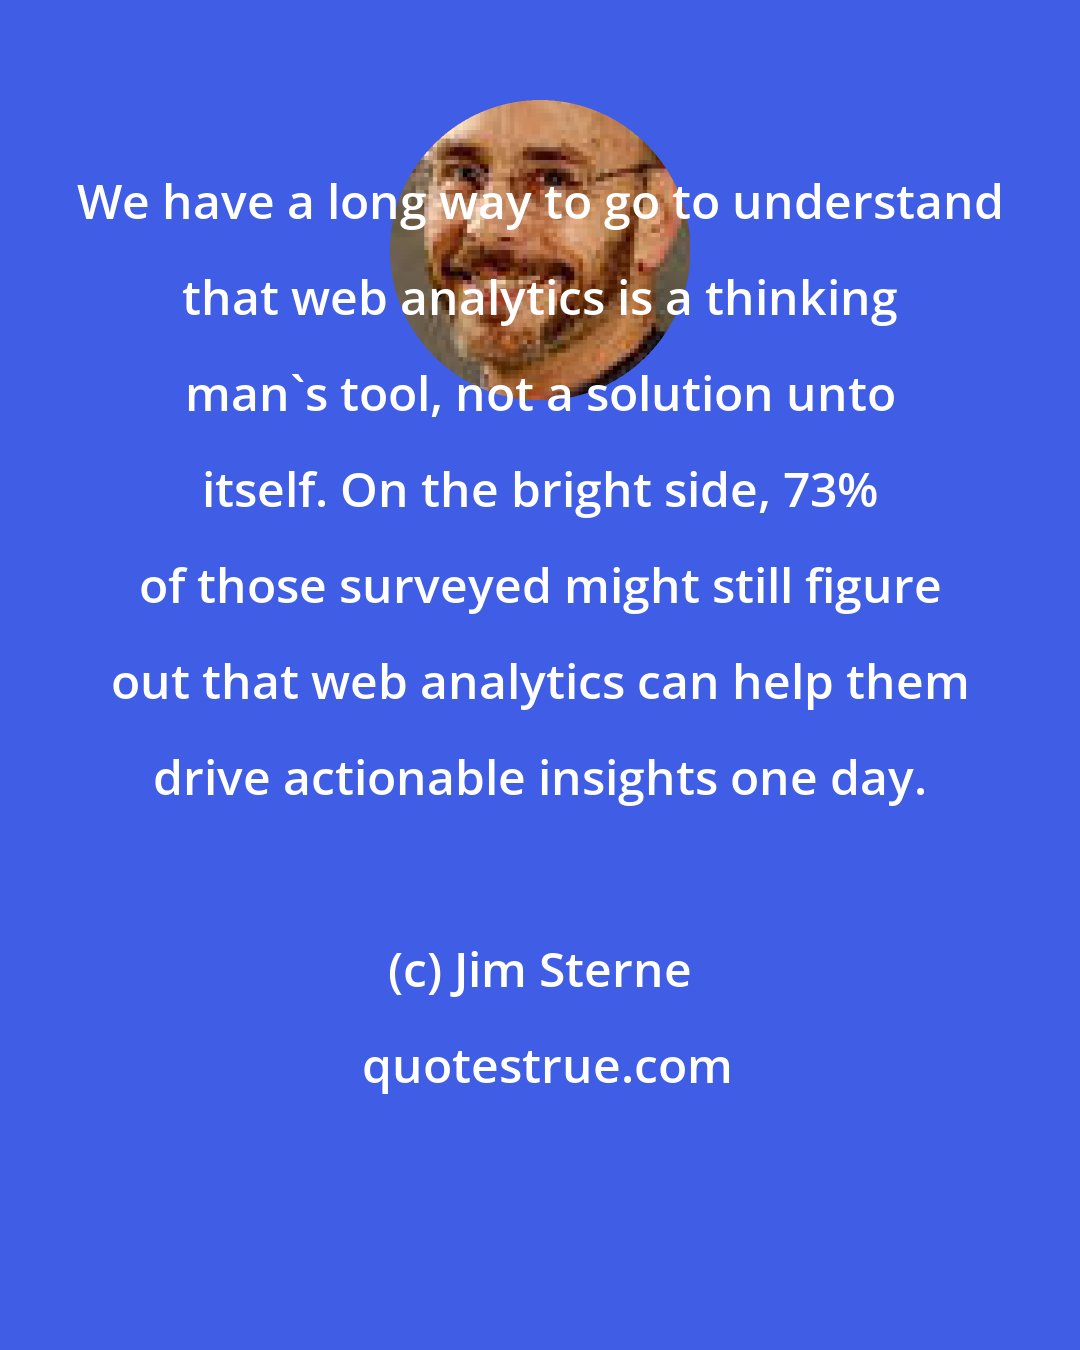 Jim Sterne: We have a long way to go to understand that web analytics is a thinking man's tool, not a solution unto itself. On the bright side, 73% of those surveyed might still figure out that web analytics can help them drive actionable insights one day.